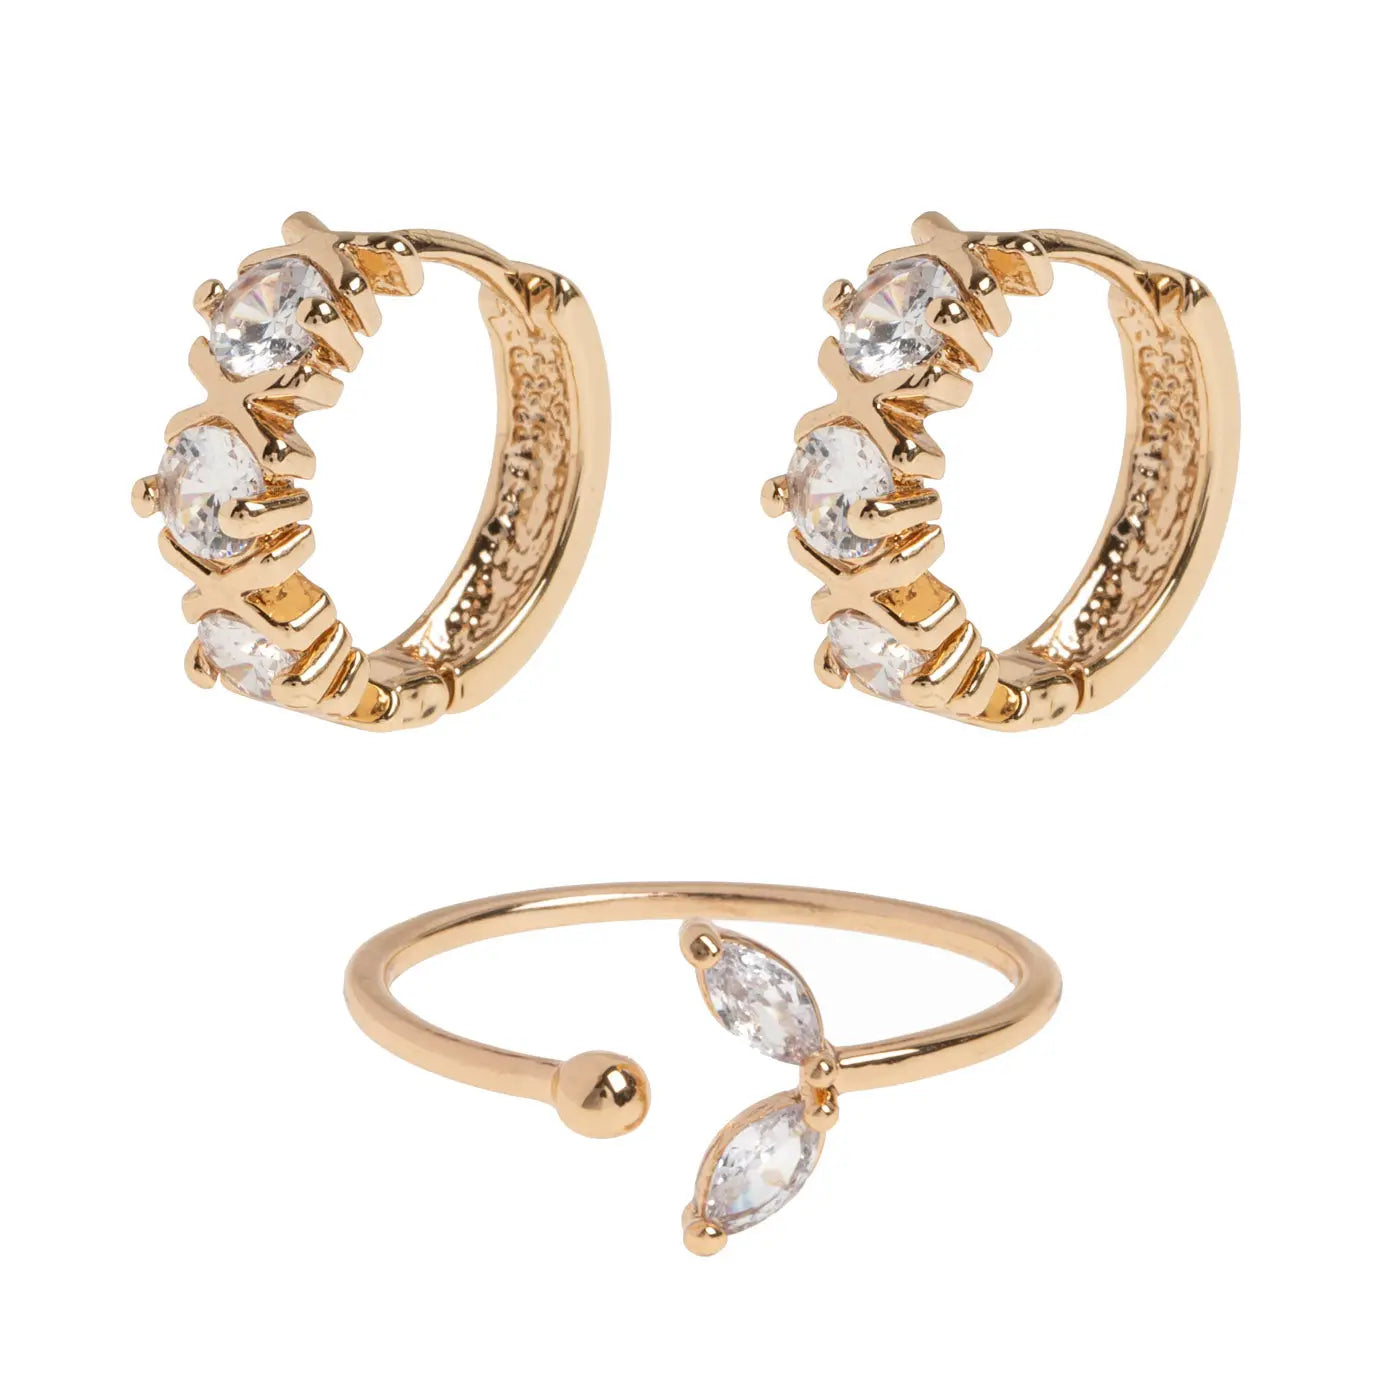 Crystal Set Ring and Earrings